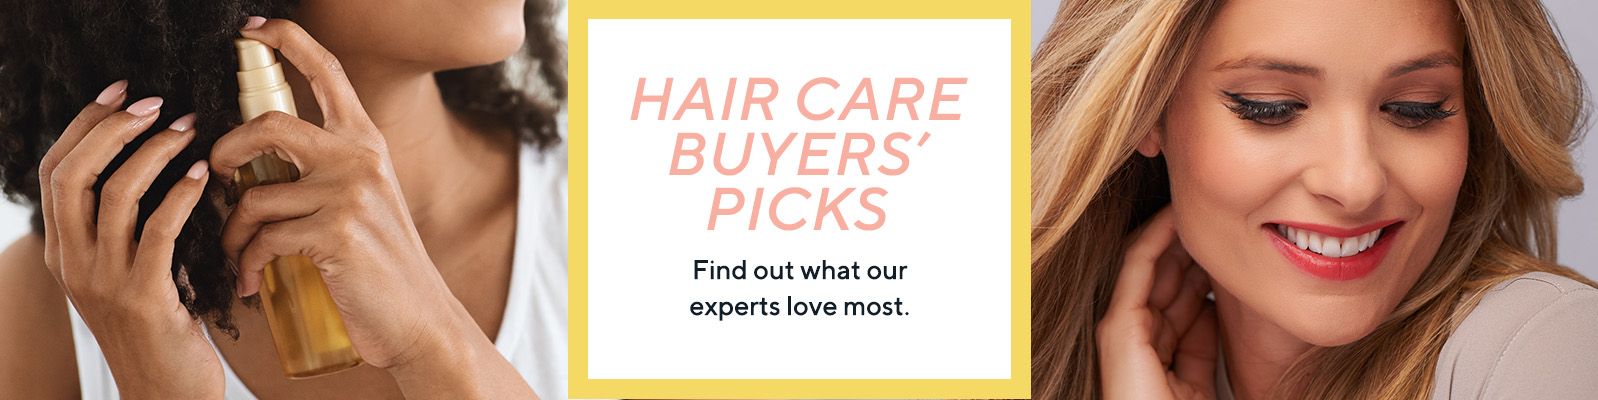 Hair Care Buyers' Picks Find out what our experts love most.